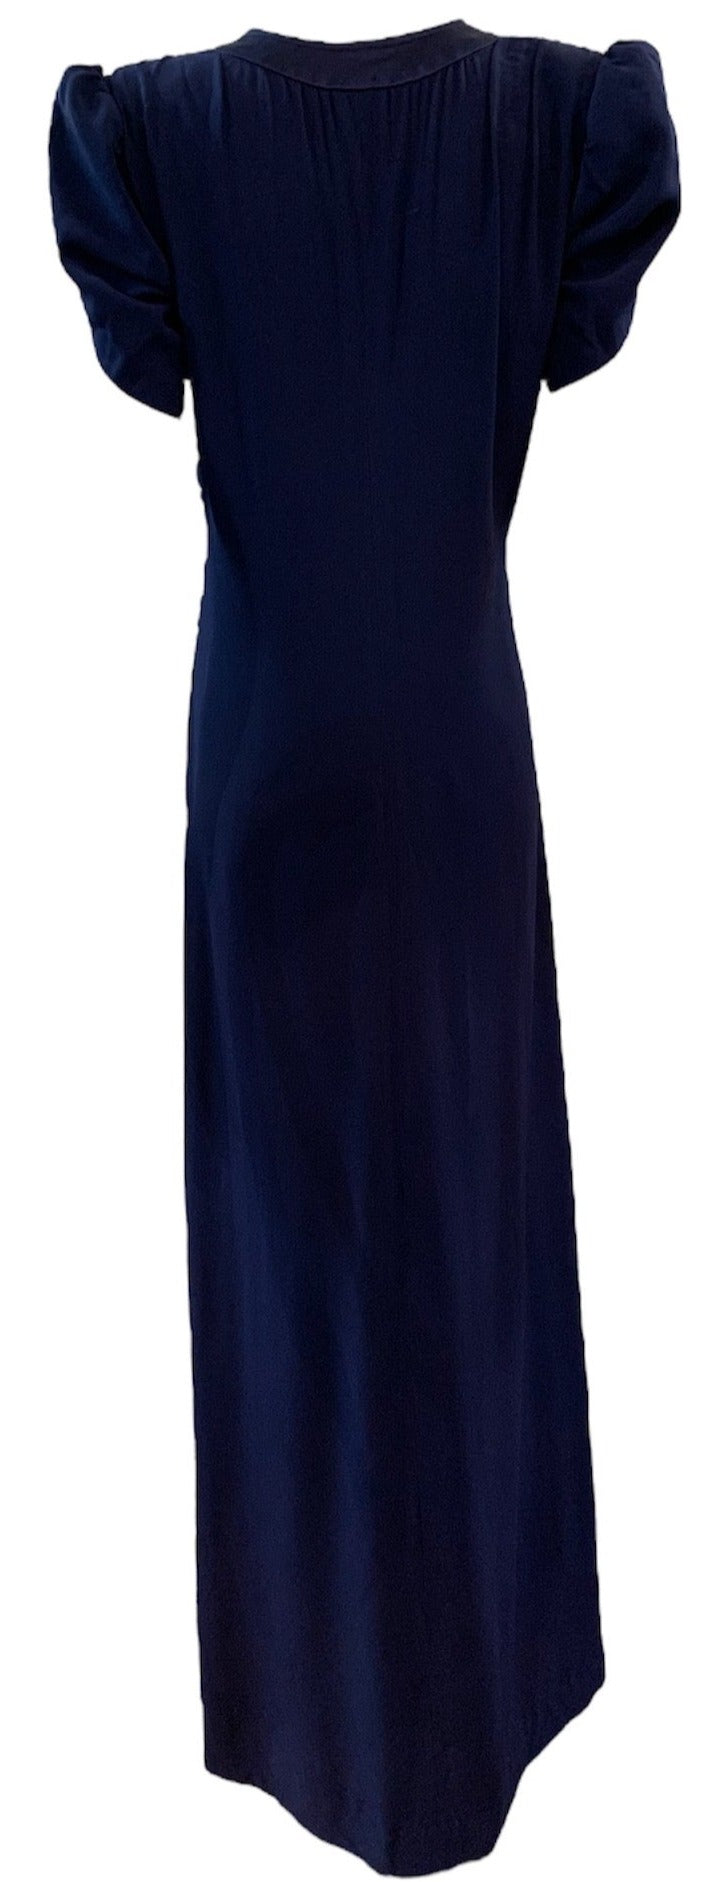 YSL Rive Gauche Blue Satin Backed Crepe 70s Look Maxi Dress BACK 3 of 5